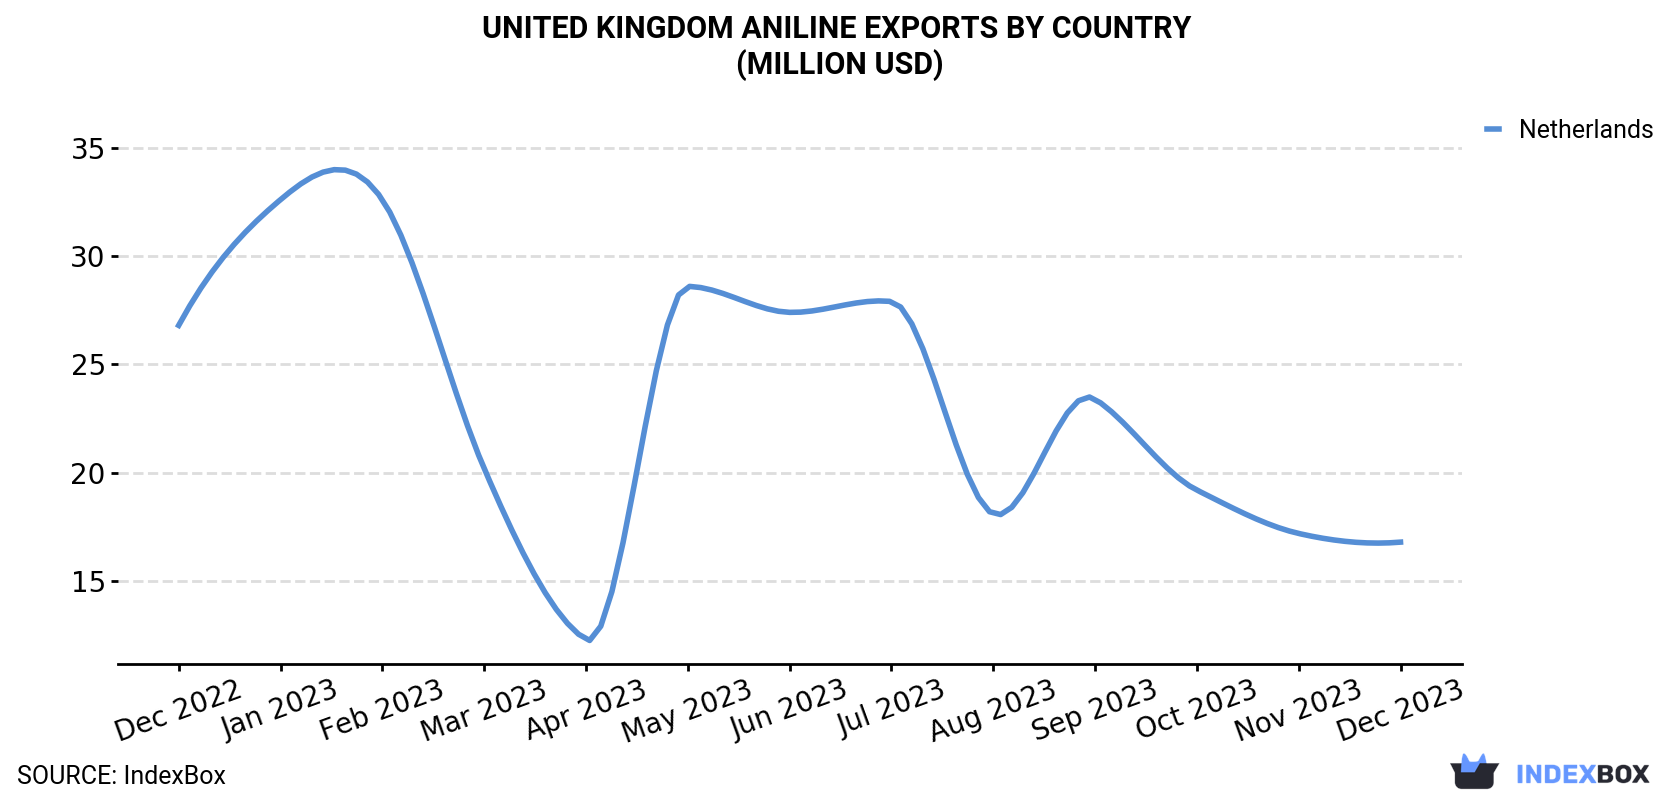 United Kingdom Aniline Exports By Country (Million USD)